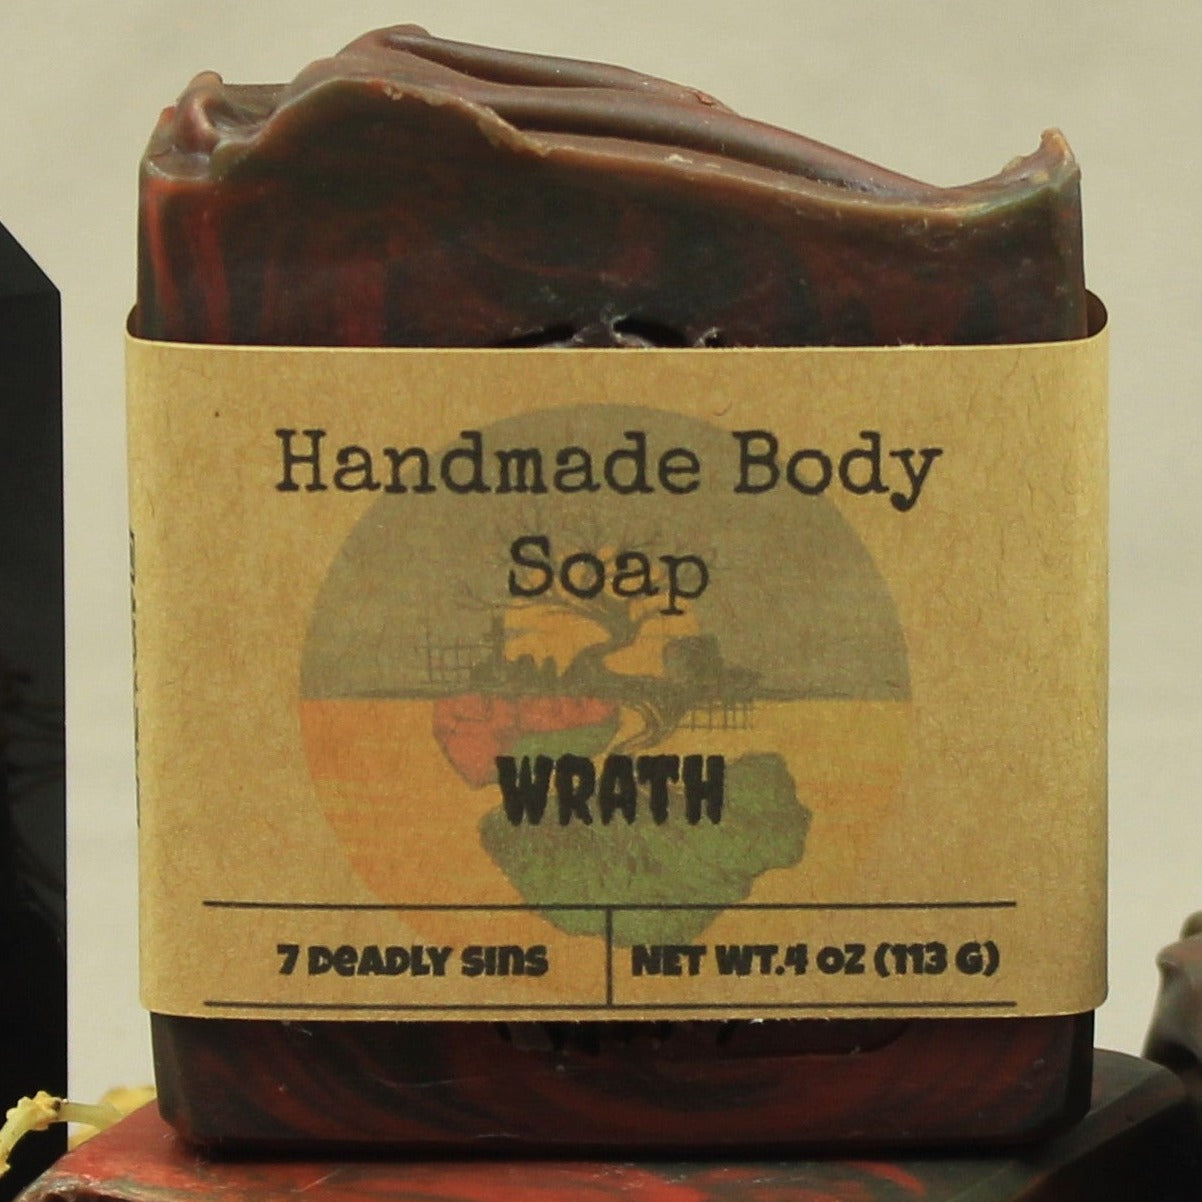 Wrath handmade soap, black and red swirls, labeled. Scented in dragon's blood and bonfire